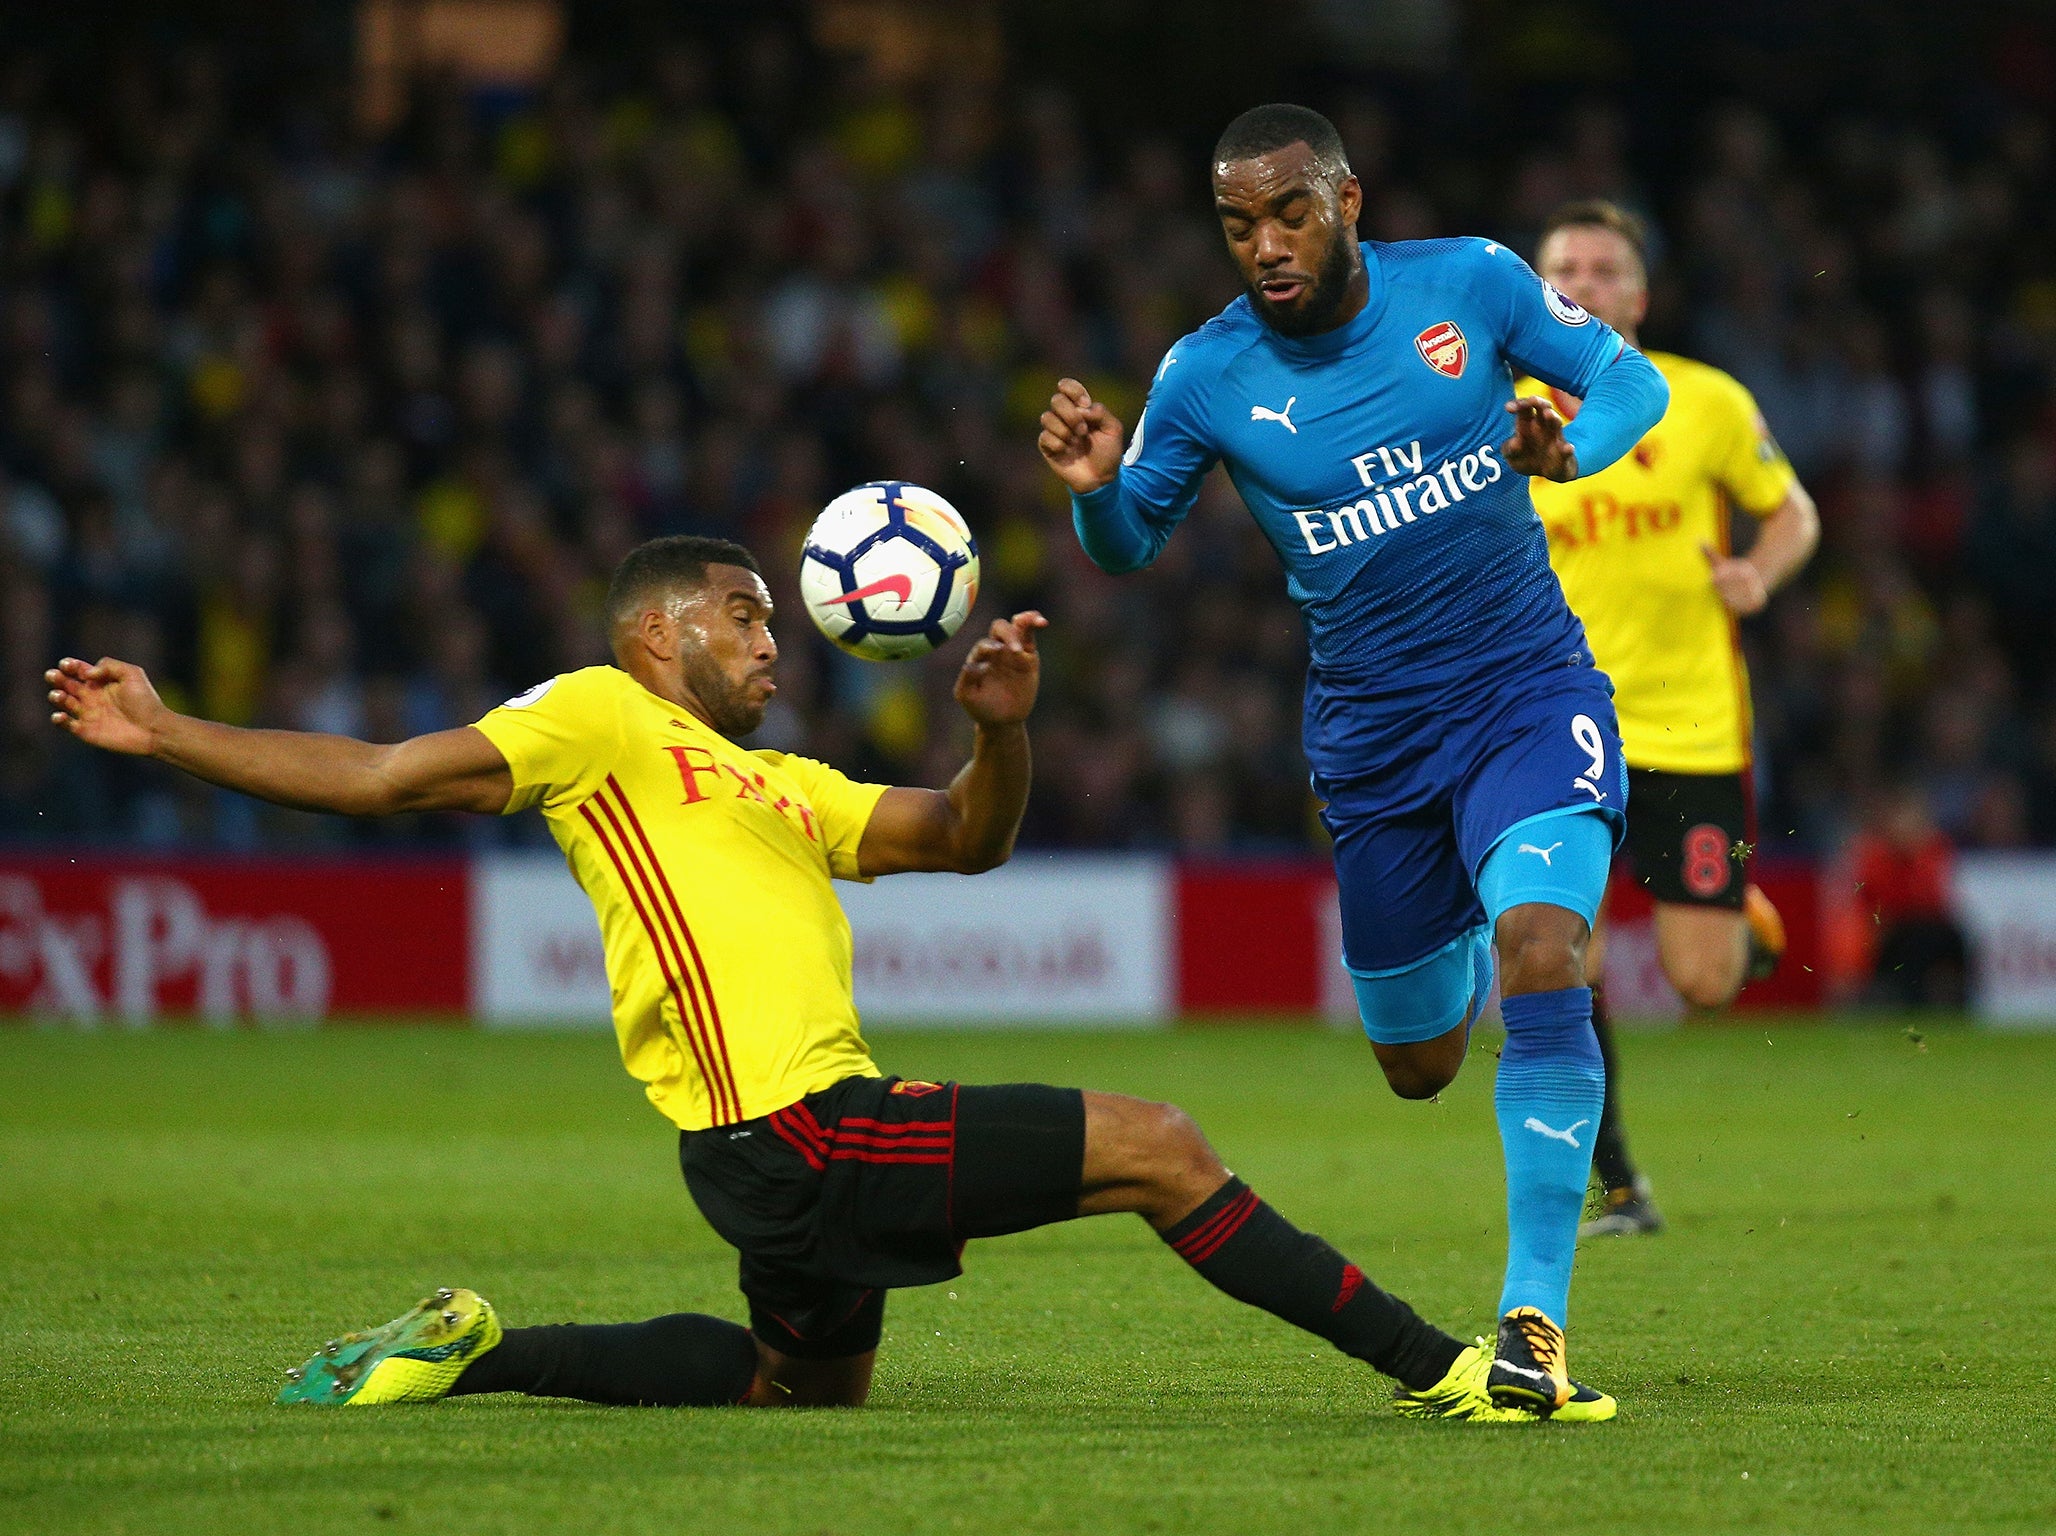 Watford and Arsenal played out an entertaining 1-1 draw